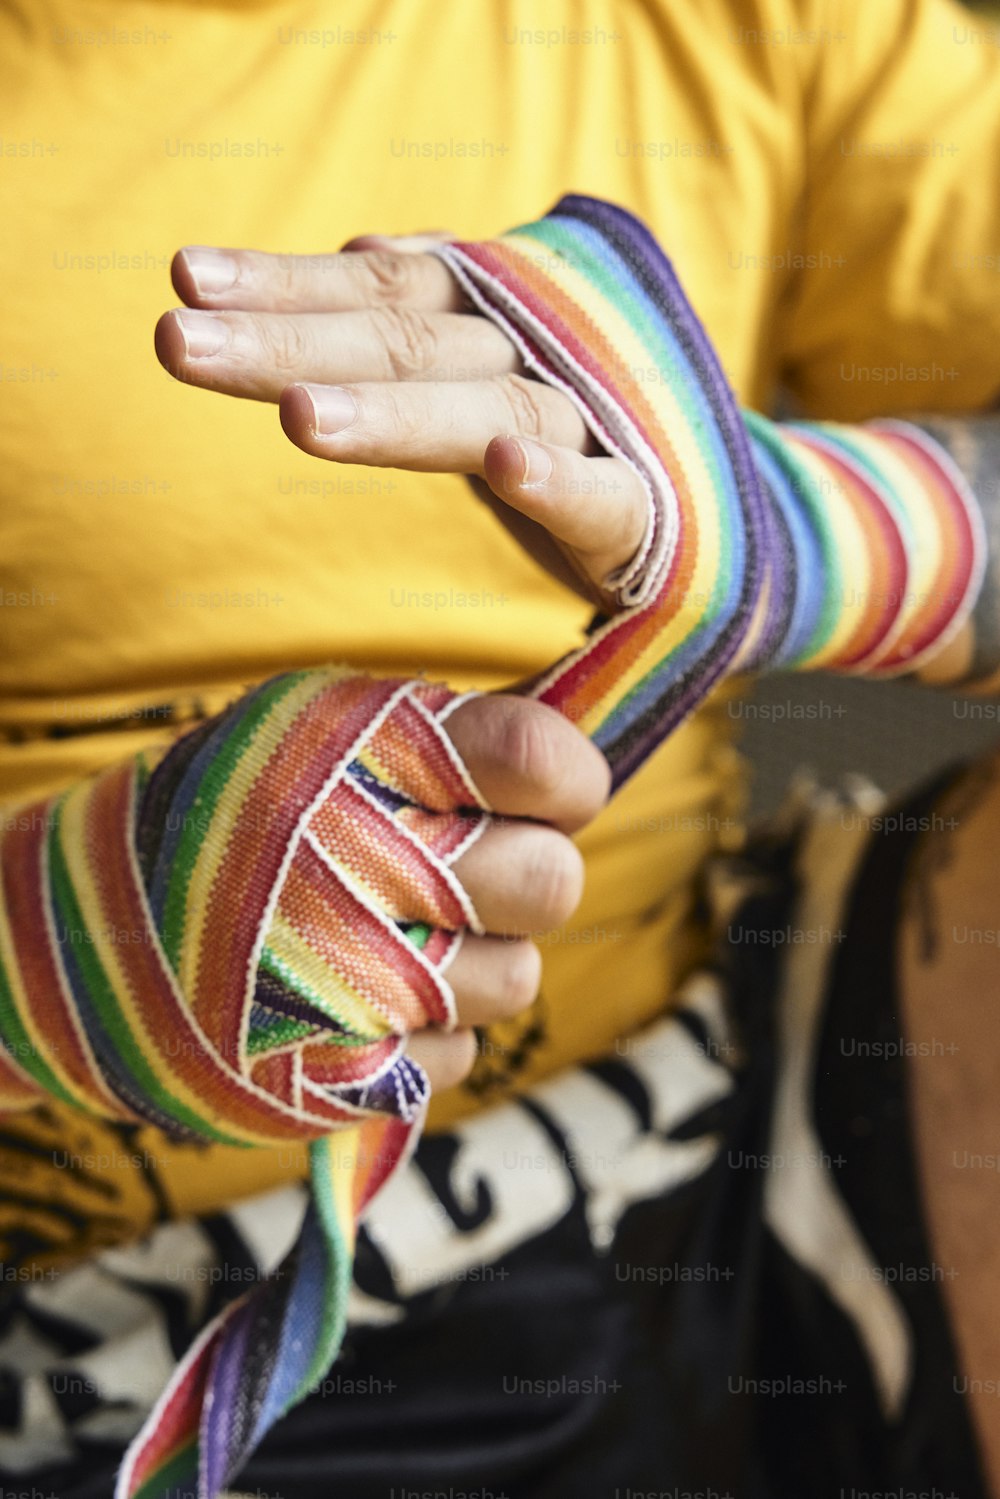 a person wearing a colorful wristband and a yellow shirt